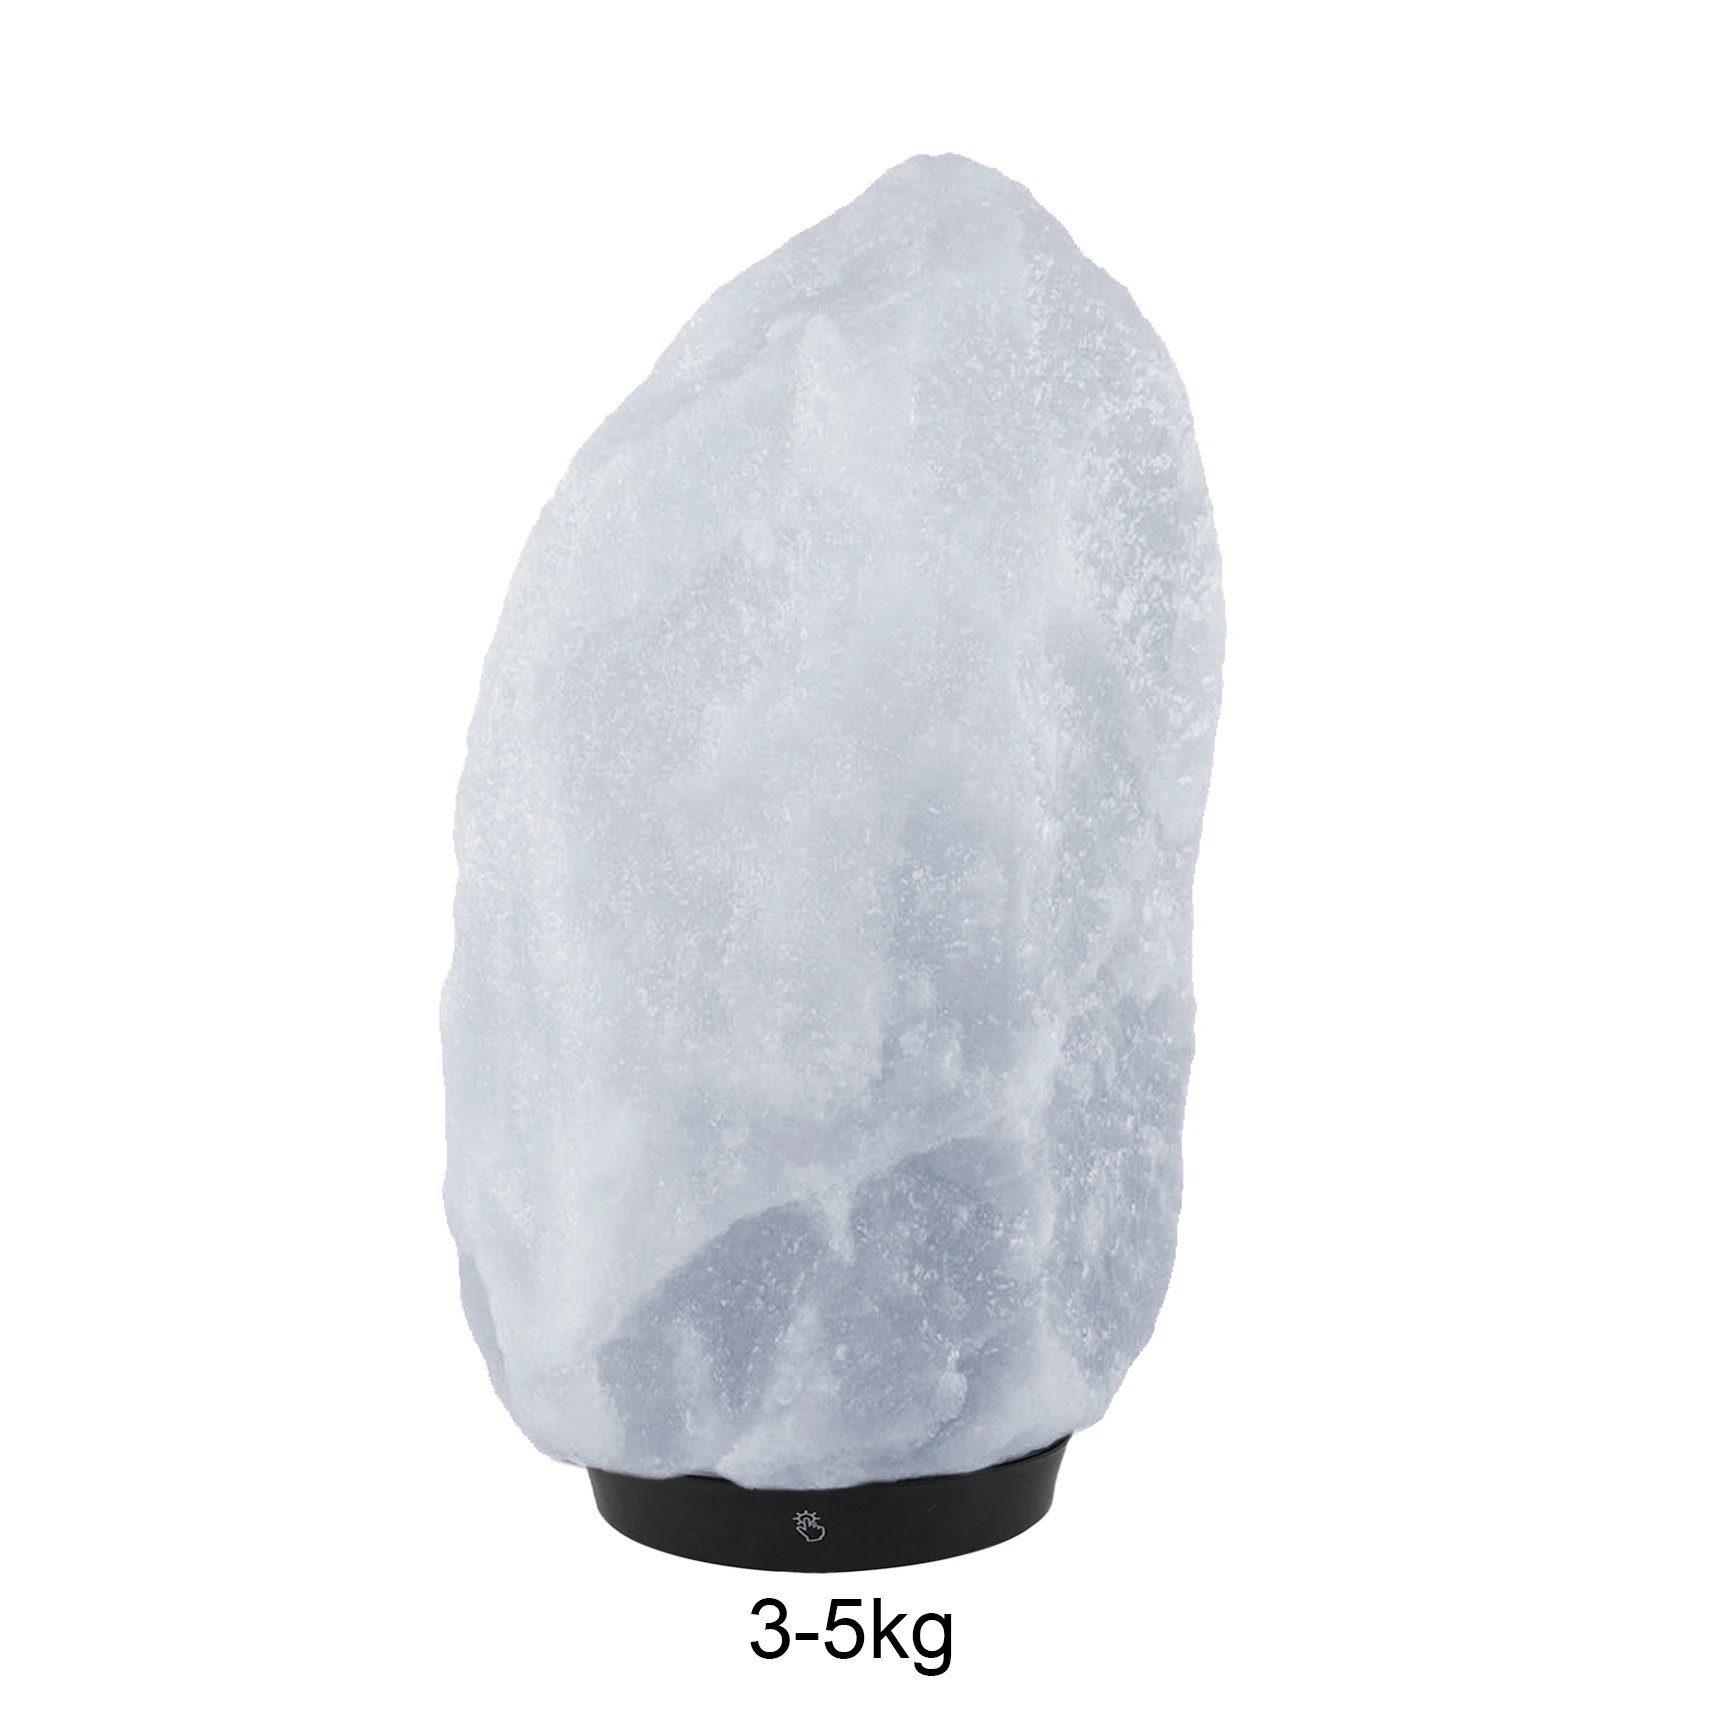 Wholesale Best Ranking Relax Mind Bulk Room Decor Crafted Pink Natural Rock Crystal Himalayan Salt Lamp Suppliers Night Light